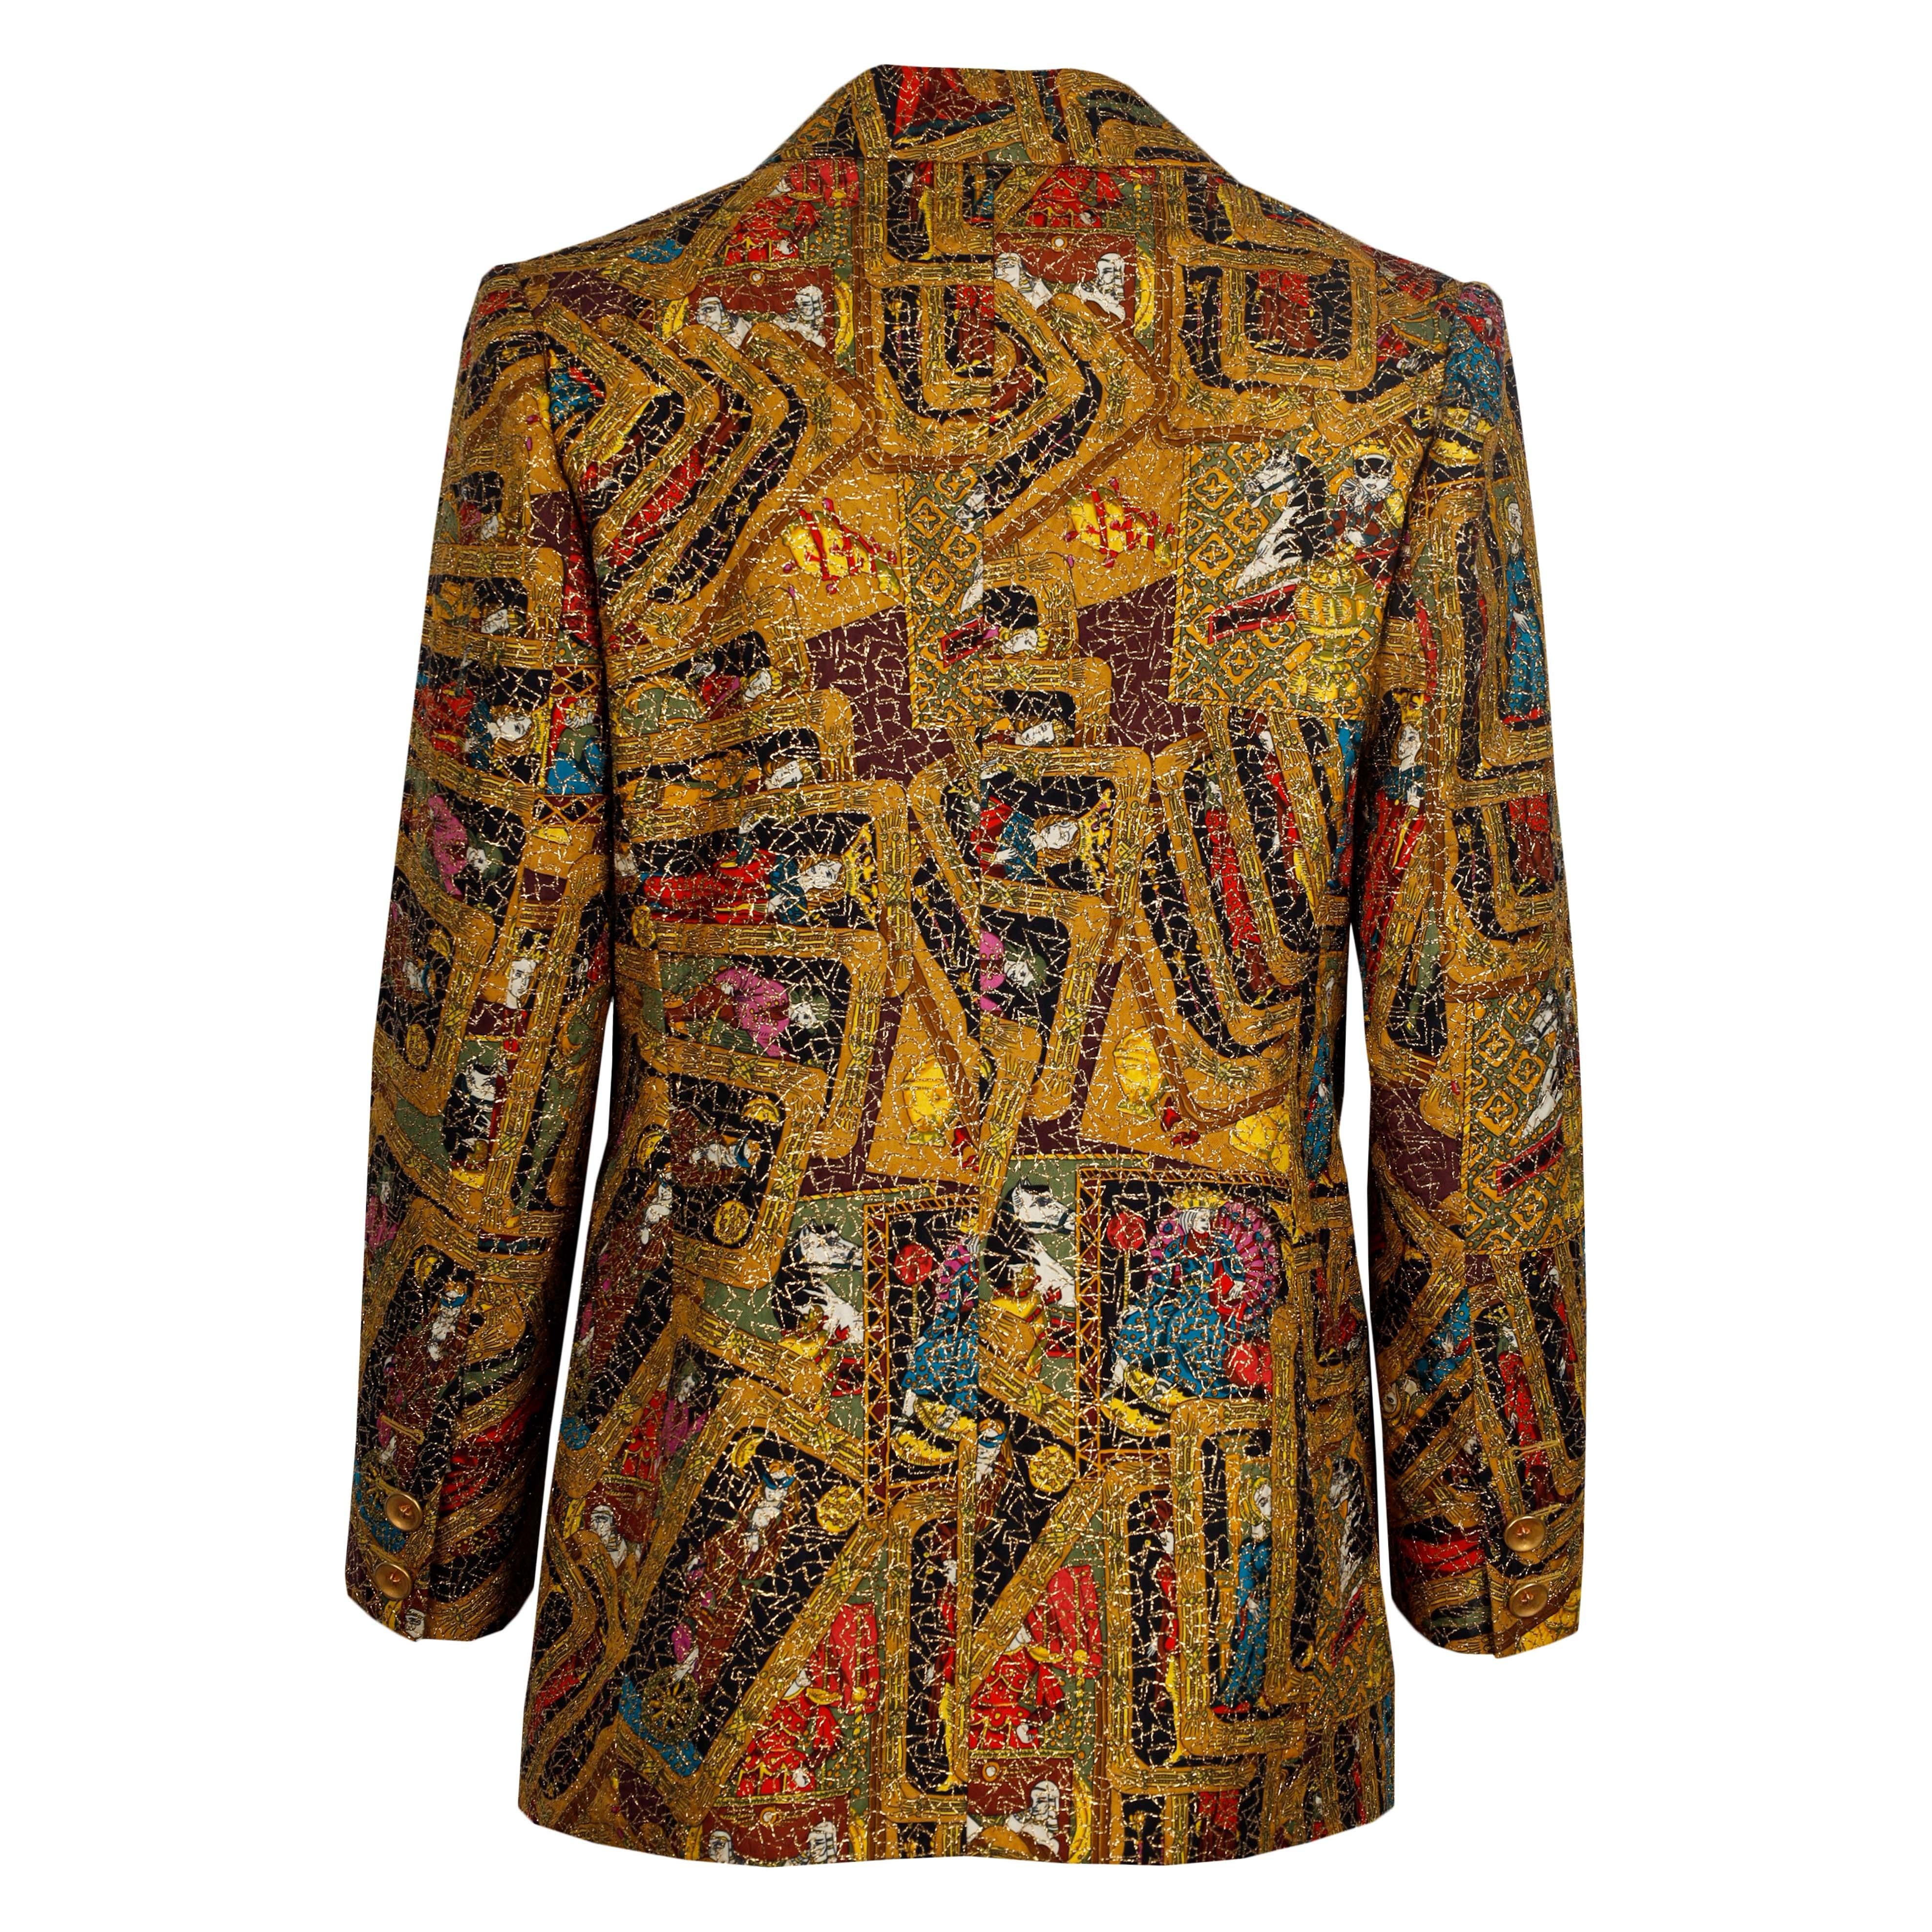 Merging unique metallic embroidery with printed silk, the Hermès Silk Printed Jacket with Metallic Embroidery showcases tarot cards laid over each other. Crafted in France, this piece is made with 100% silk, giving it a light feel.

NFT option